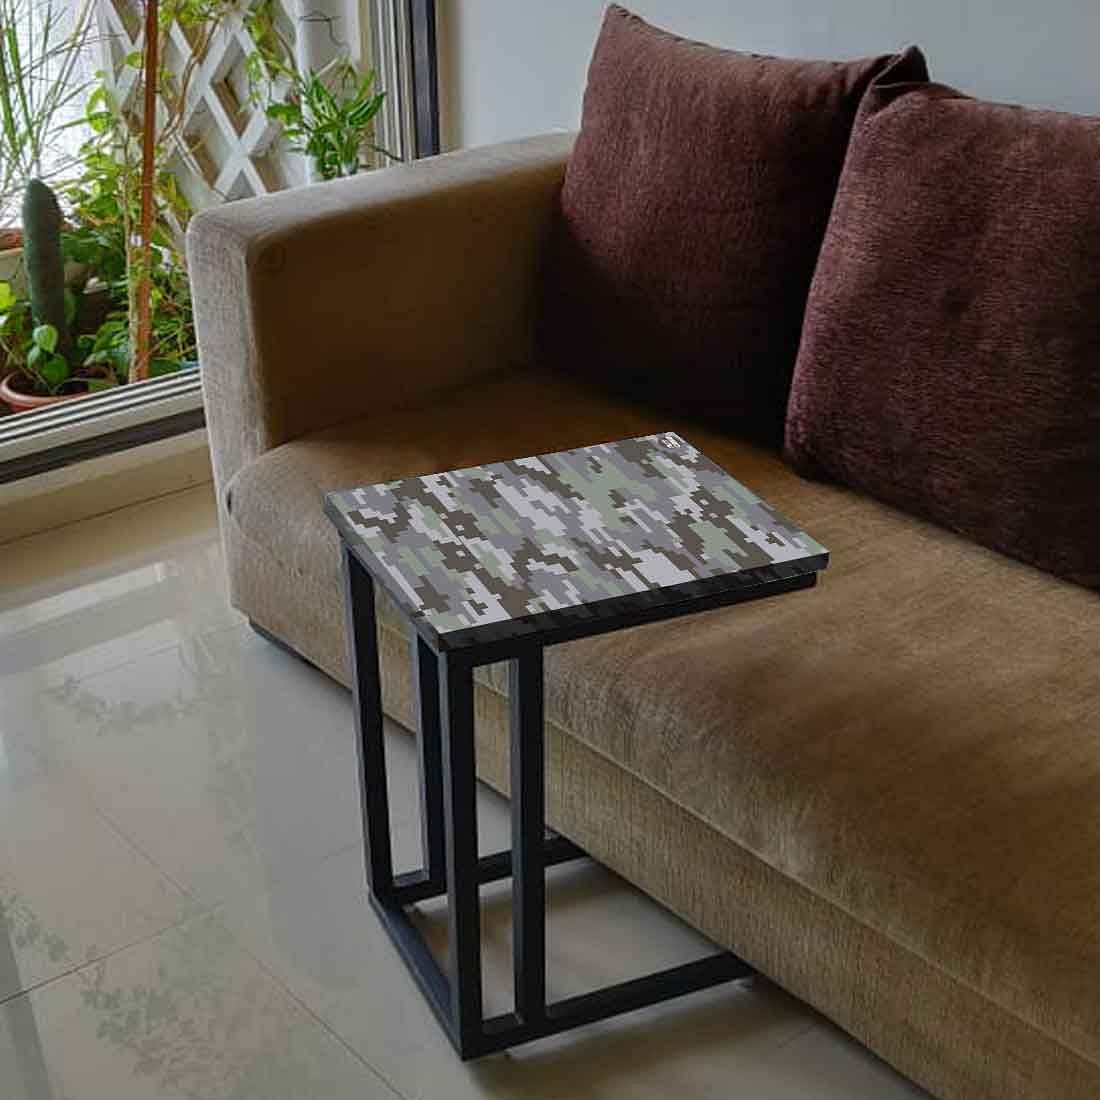 Metal Grey C Table For Sofa - Gray Camouflage Nutcase